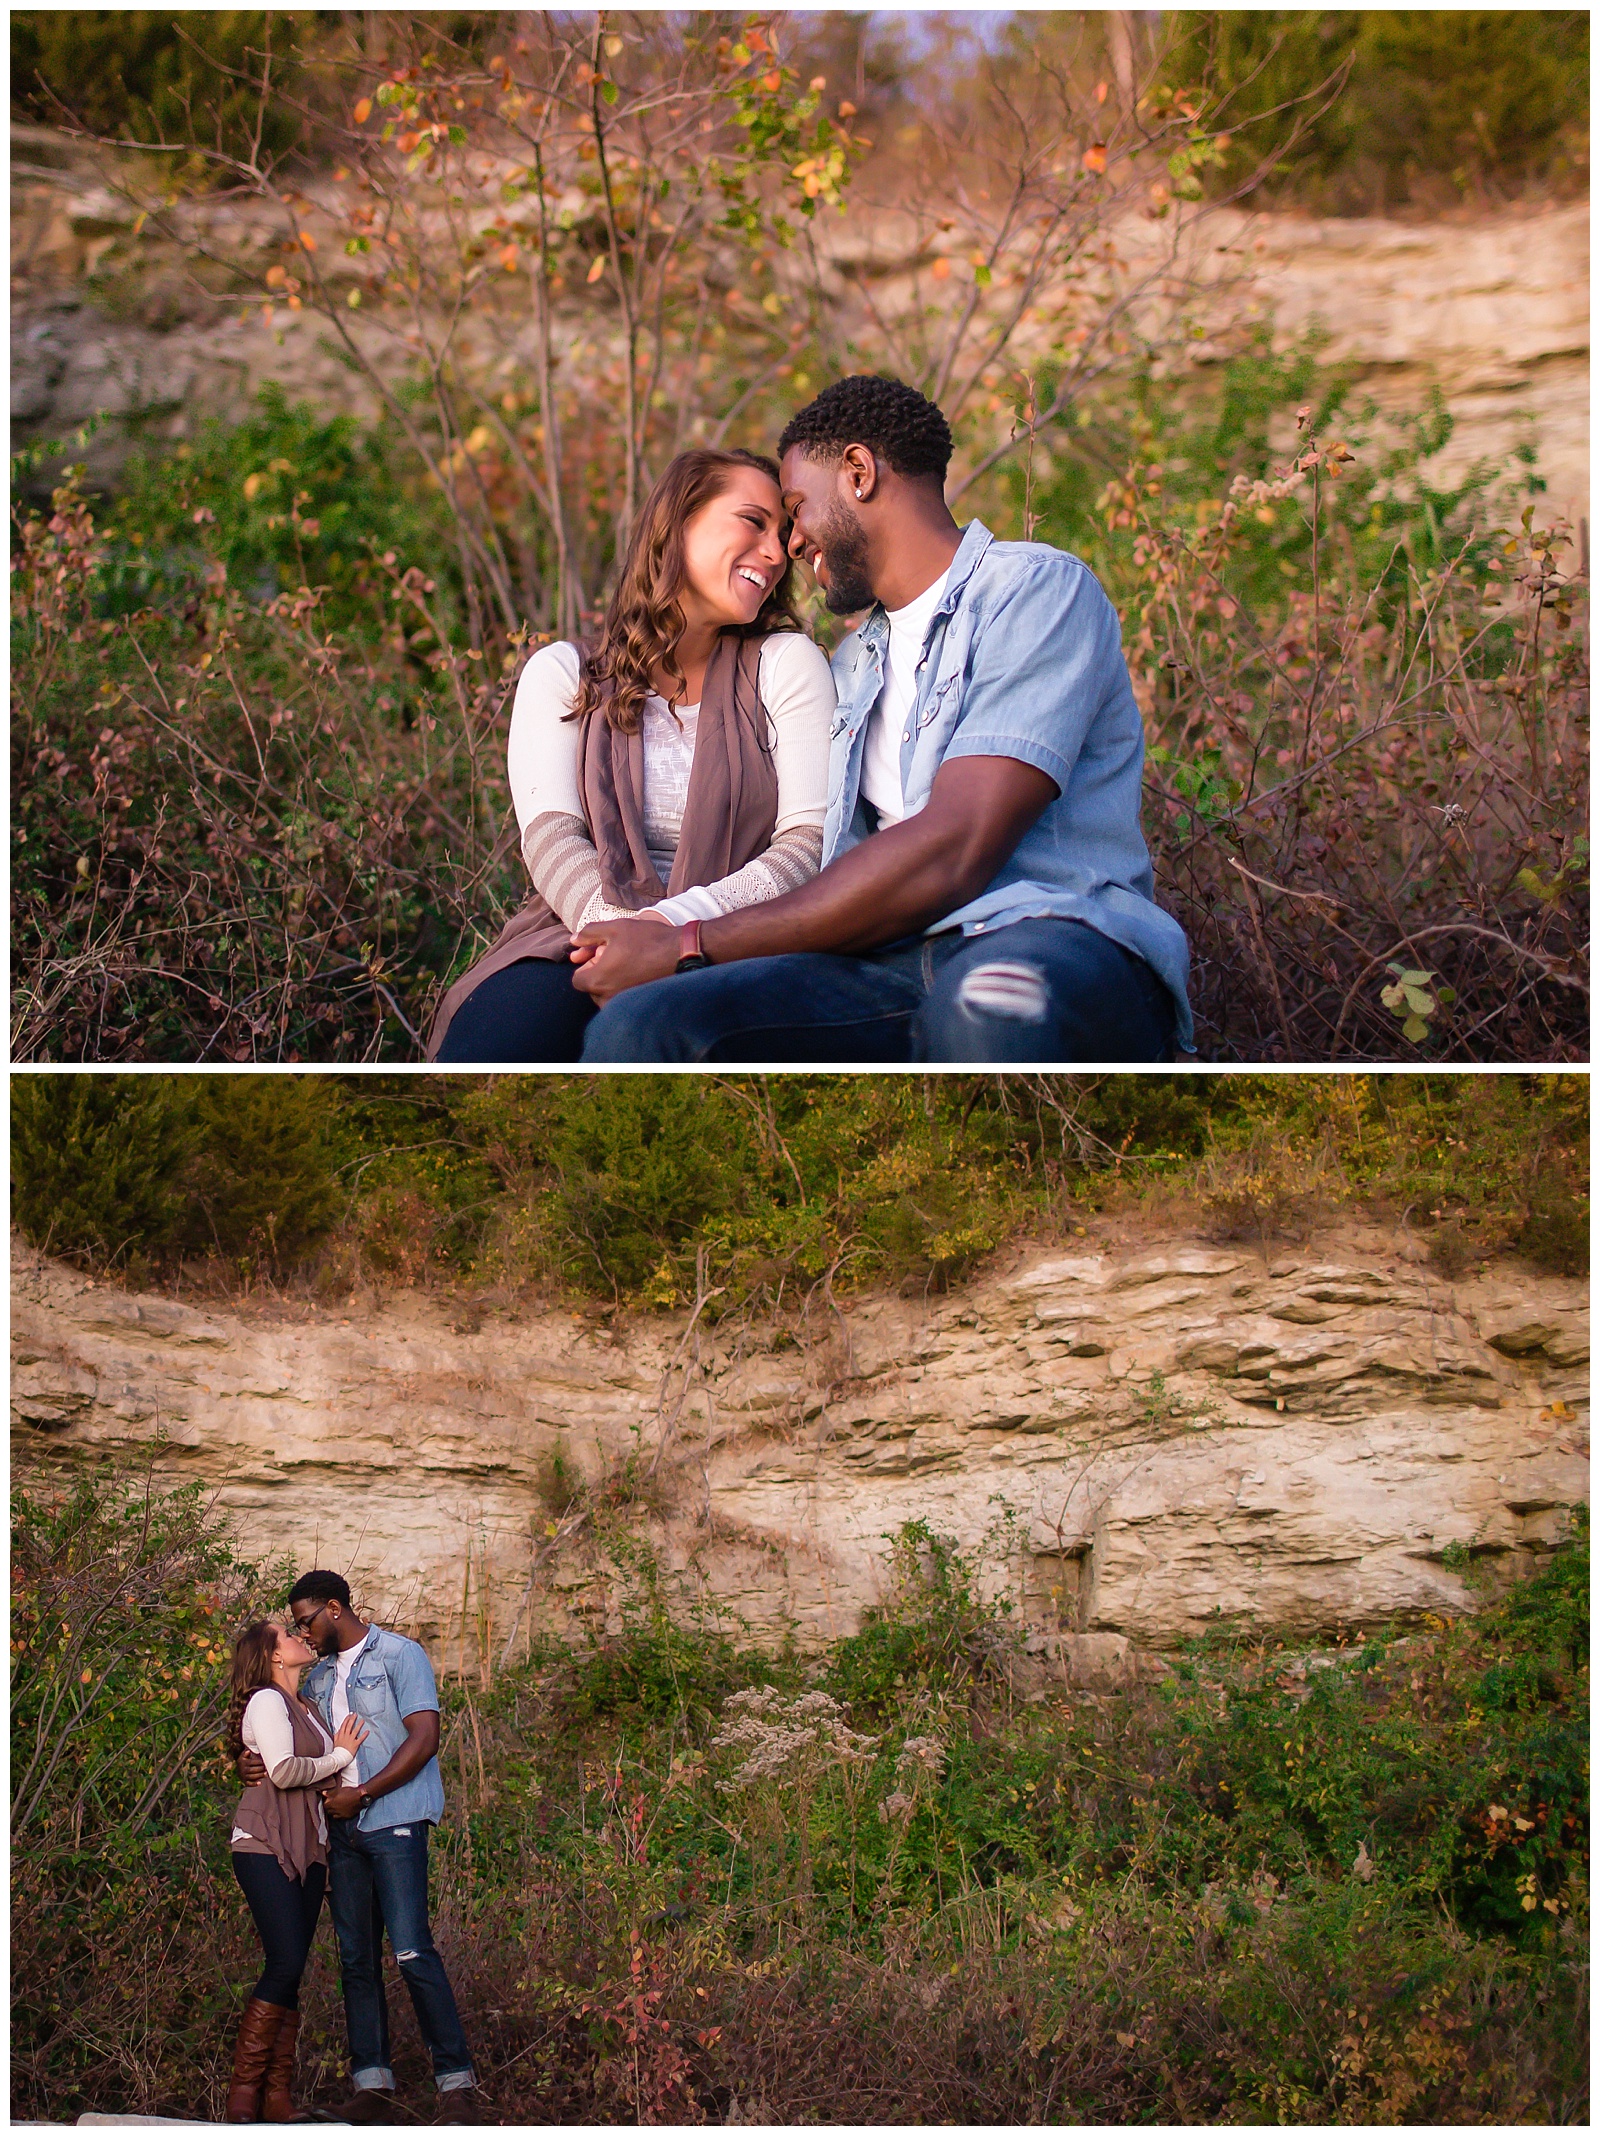 Engagement photography at the Briarcliff Waterfall in Kansas City.